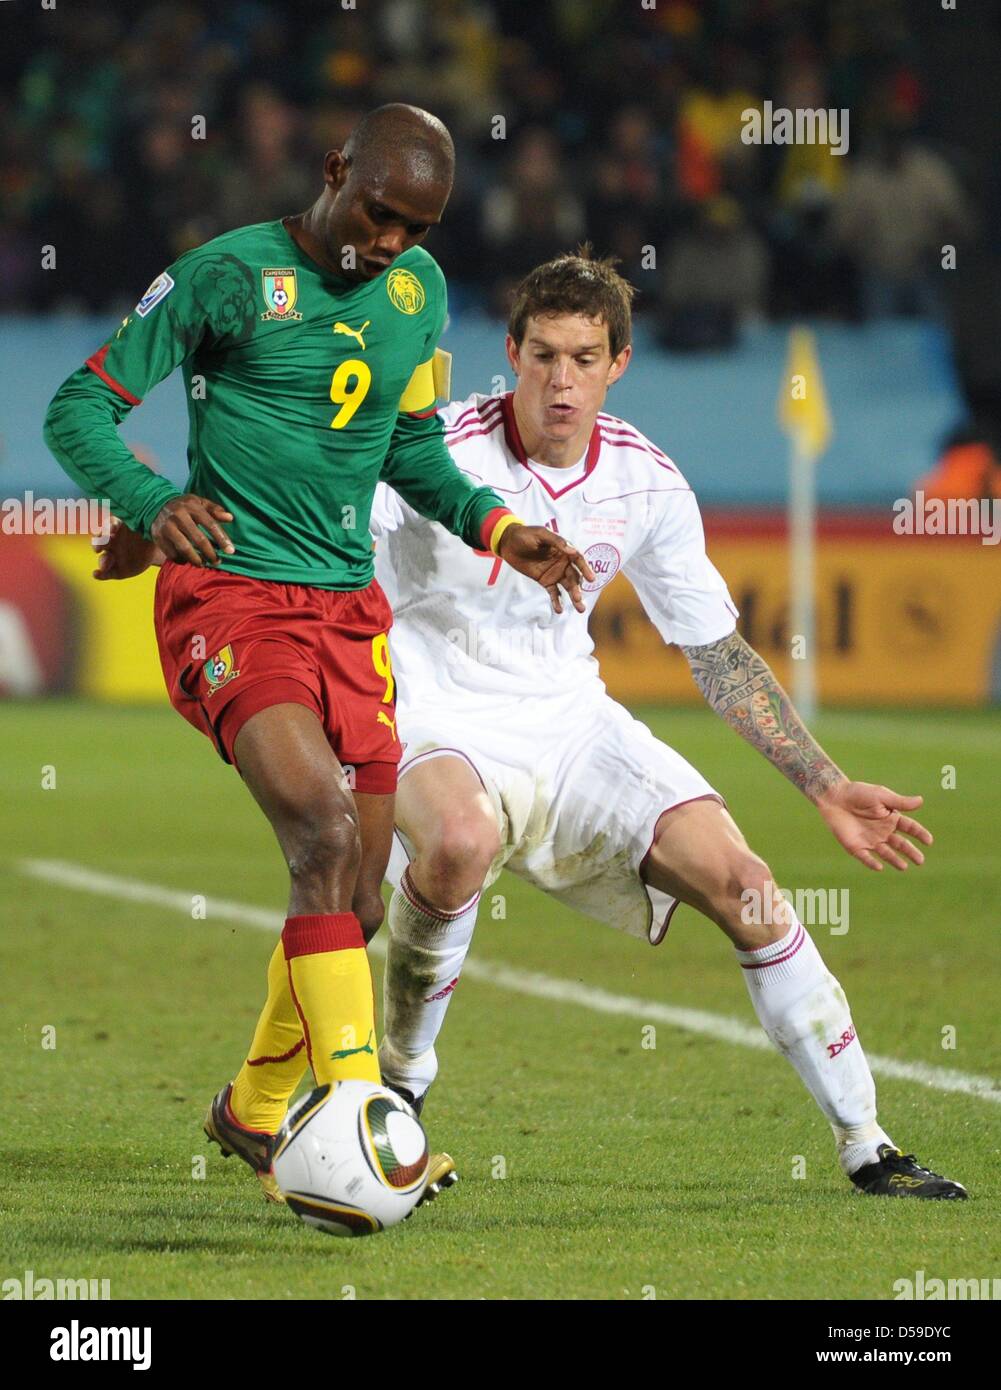 Samuel Eto'o (L) of Cameroon vies with Daniel Agger of Denmark during the FIFA World Cup 2010 group E match between Cameroon and Denmark at Loftus Versfeld Stadium in Pretoria, South Africa 19 June 2010. Photo: Ronald Wittek dpa - Please refer to http://dpaq.de/FIFA-WM2010-TC Stock Photo